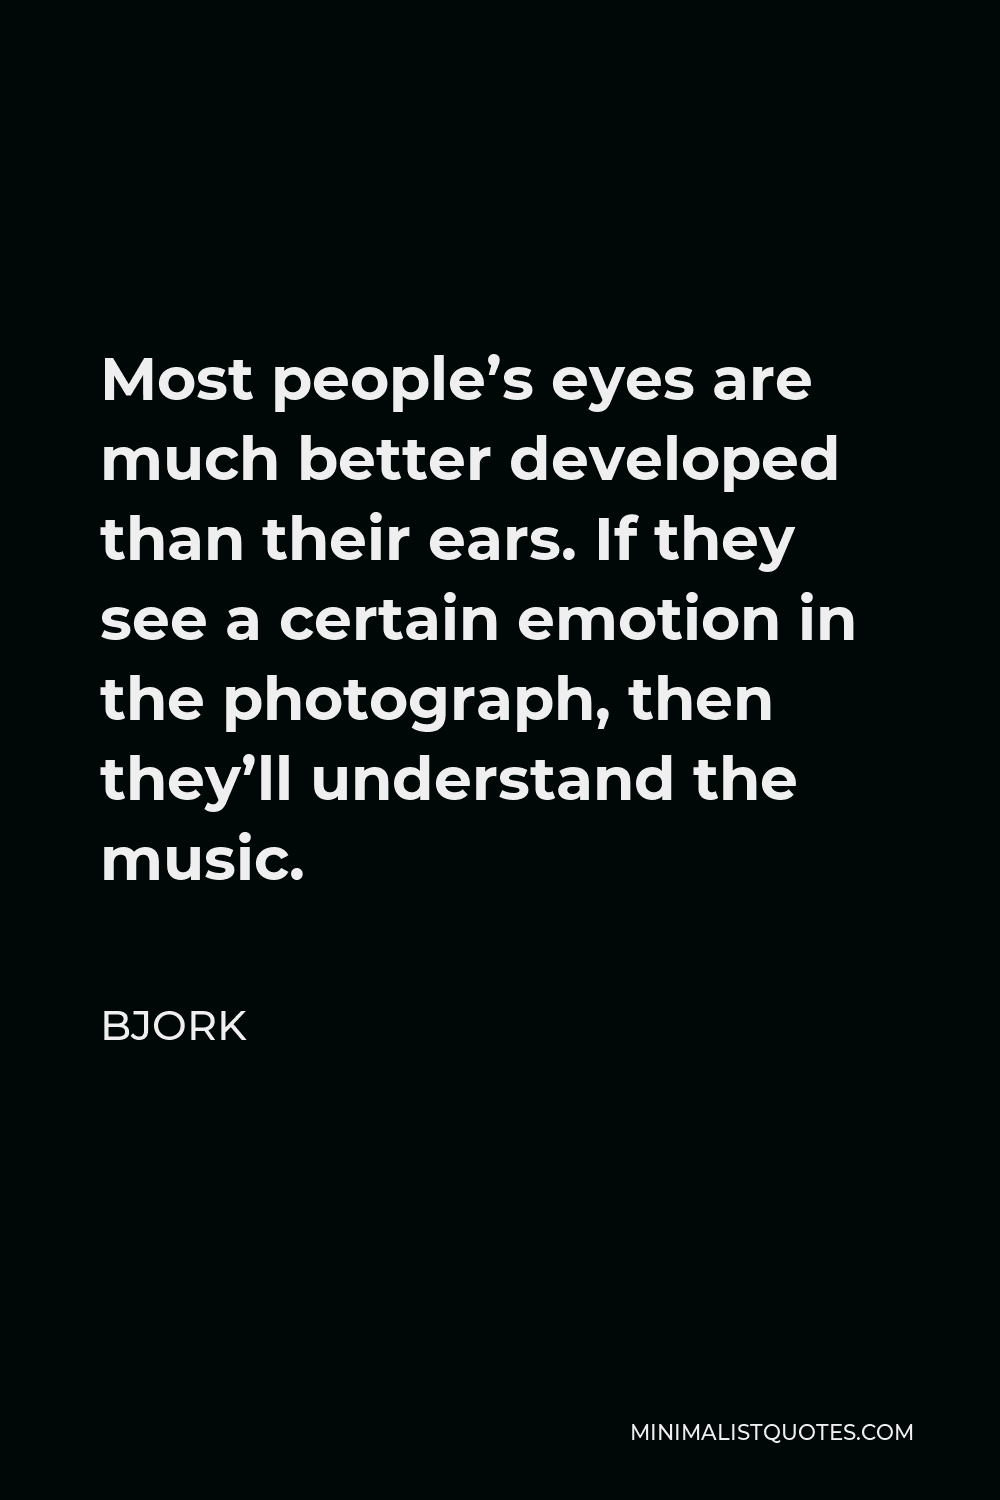 Bjork Quote - Most people’s eyes are much better developed than their ears. If they see a certain emotion in the photograph, then they’ll understand the music.